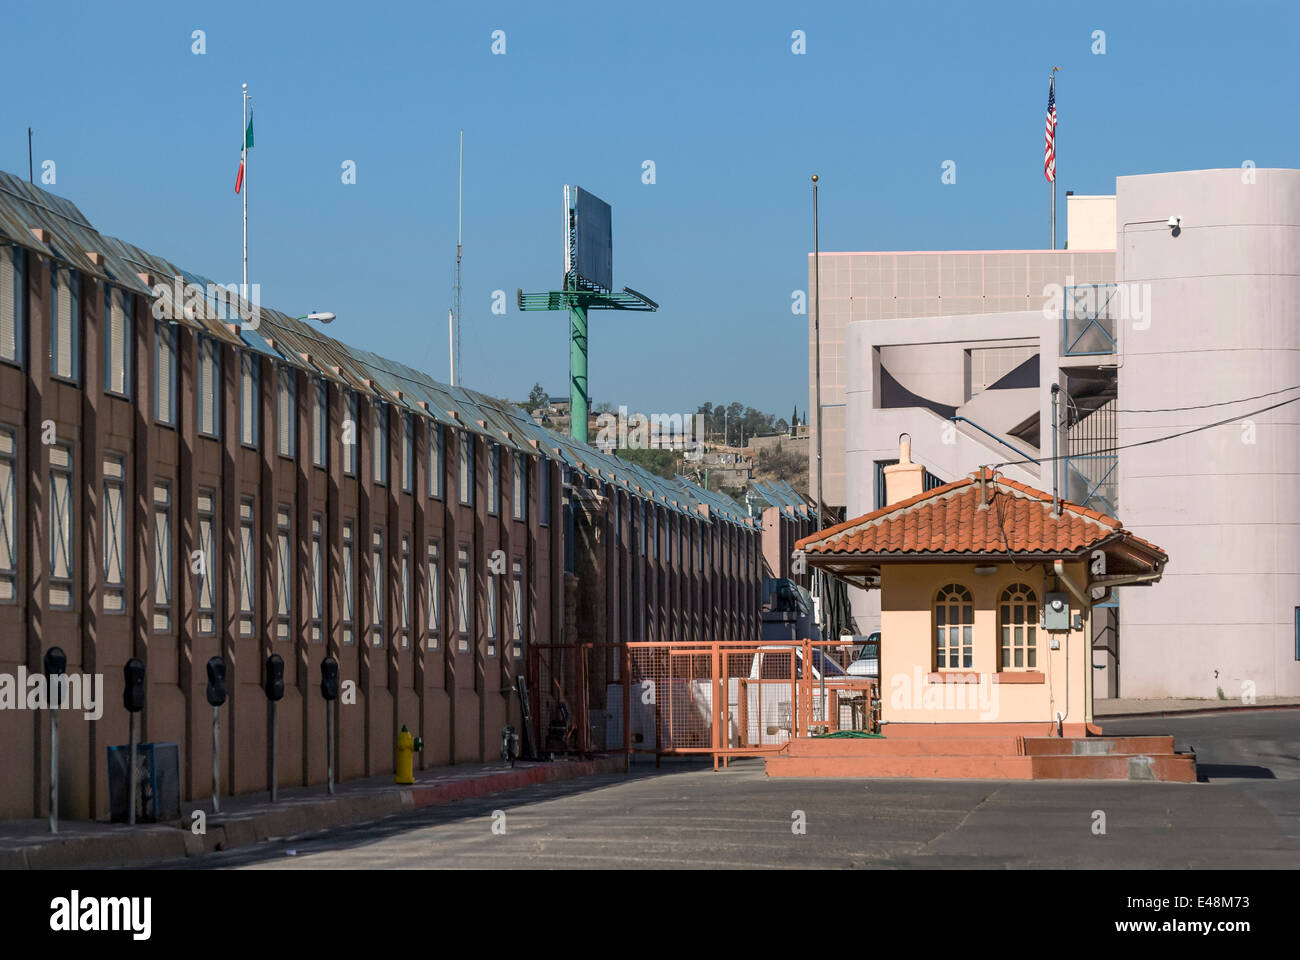 US border wall near official entry crossing in downtown Nogales Arizona USA Stock Photo